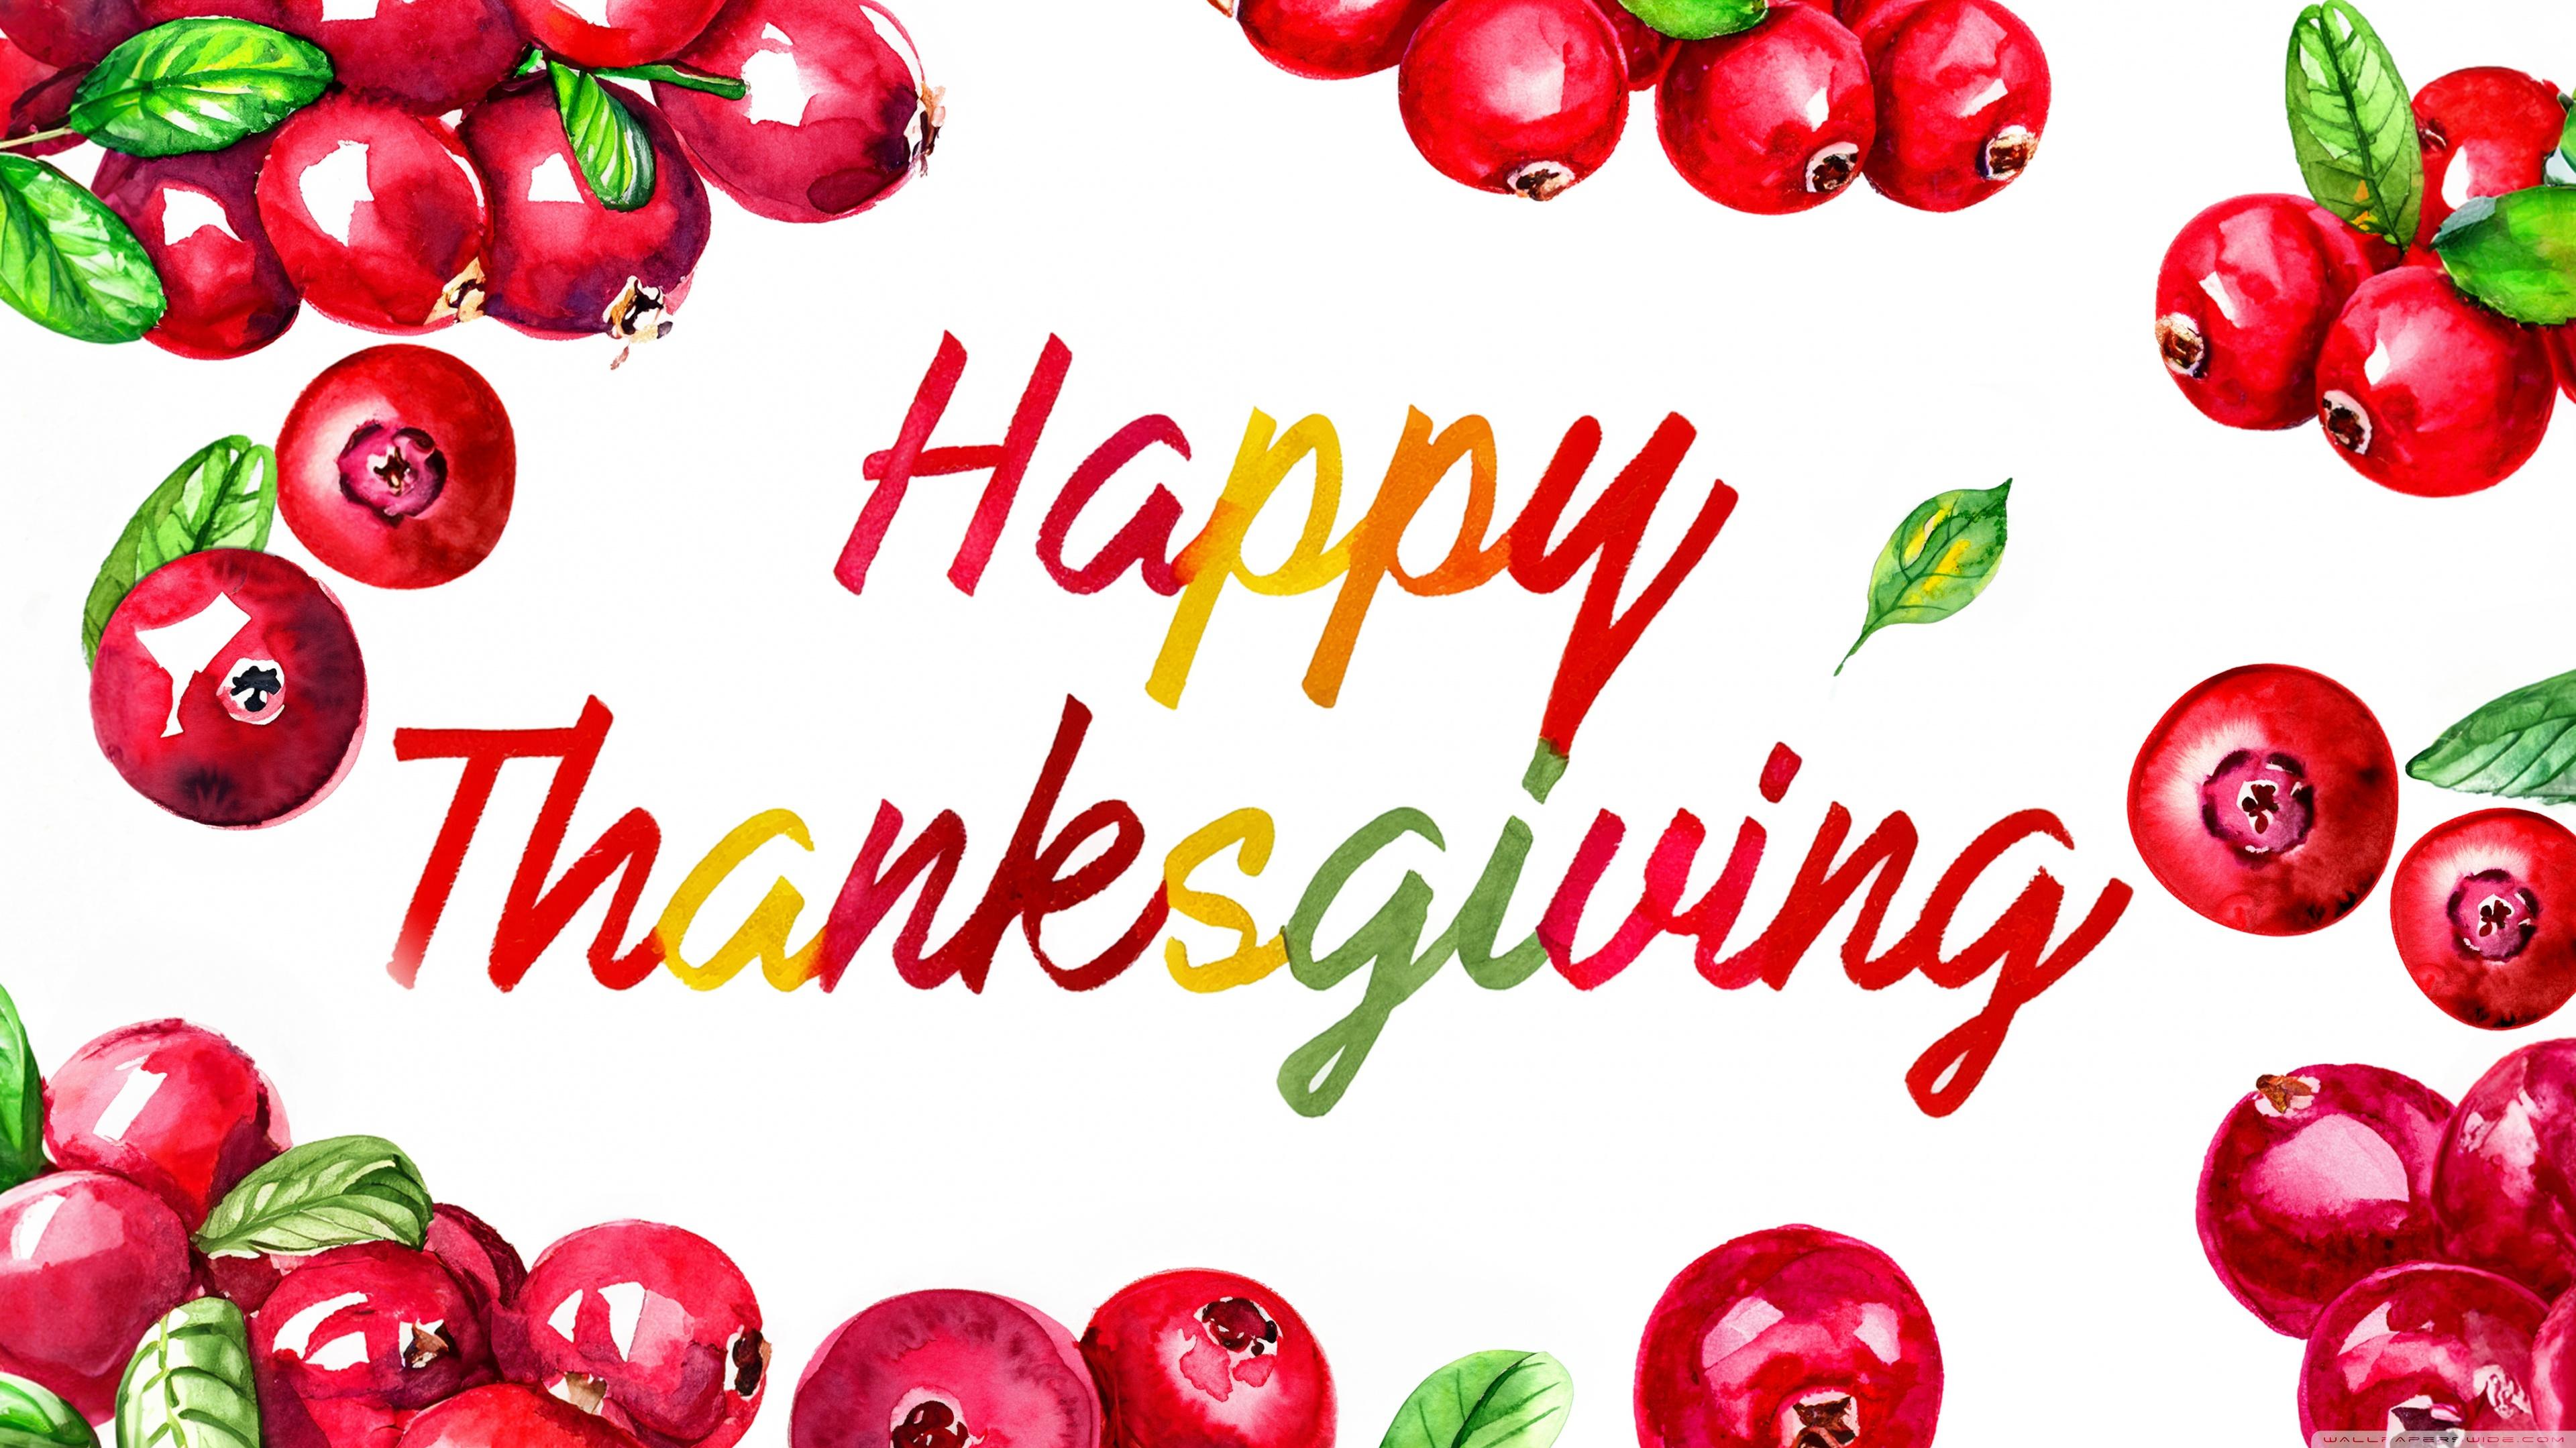 Happy Thanksgiving Cranberries Watercolor Painting Background